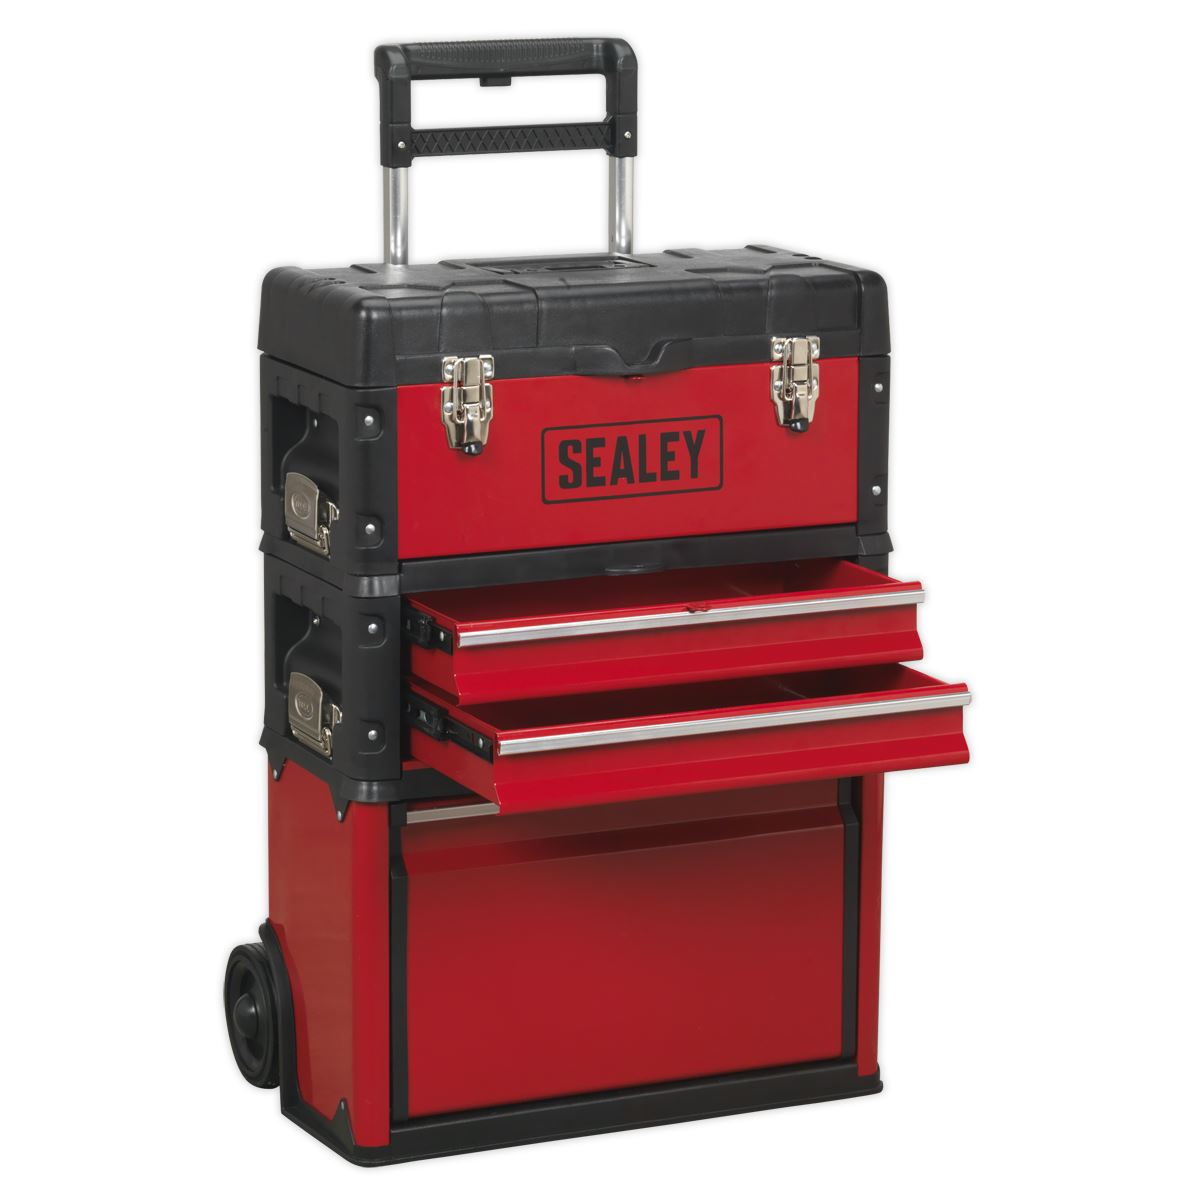 Sealey Mobile Steel/Composite Toolbox - 3 Compartment